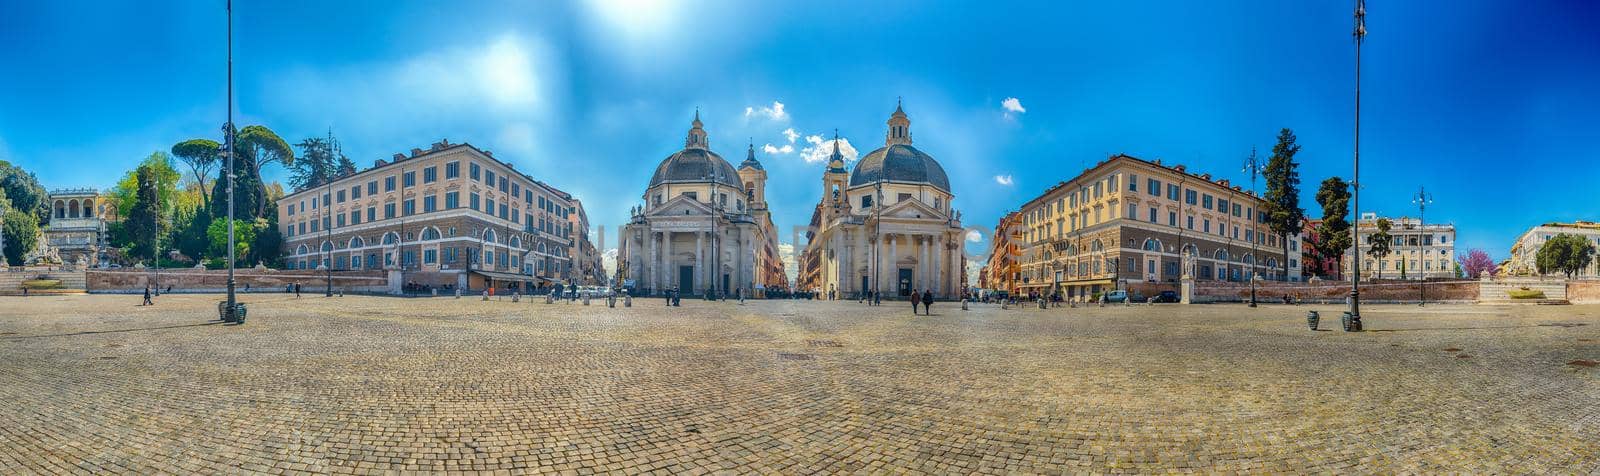 Panoramic view of the twin churches in Piazza del Popolo, iconic square and major landmark in Rome, Italy